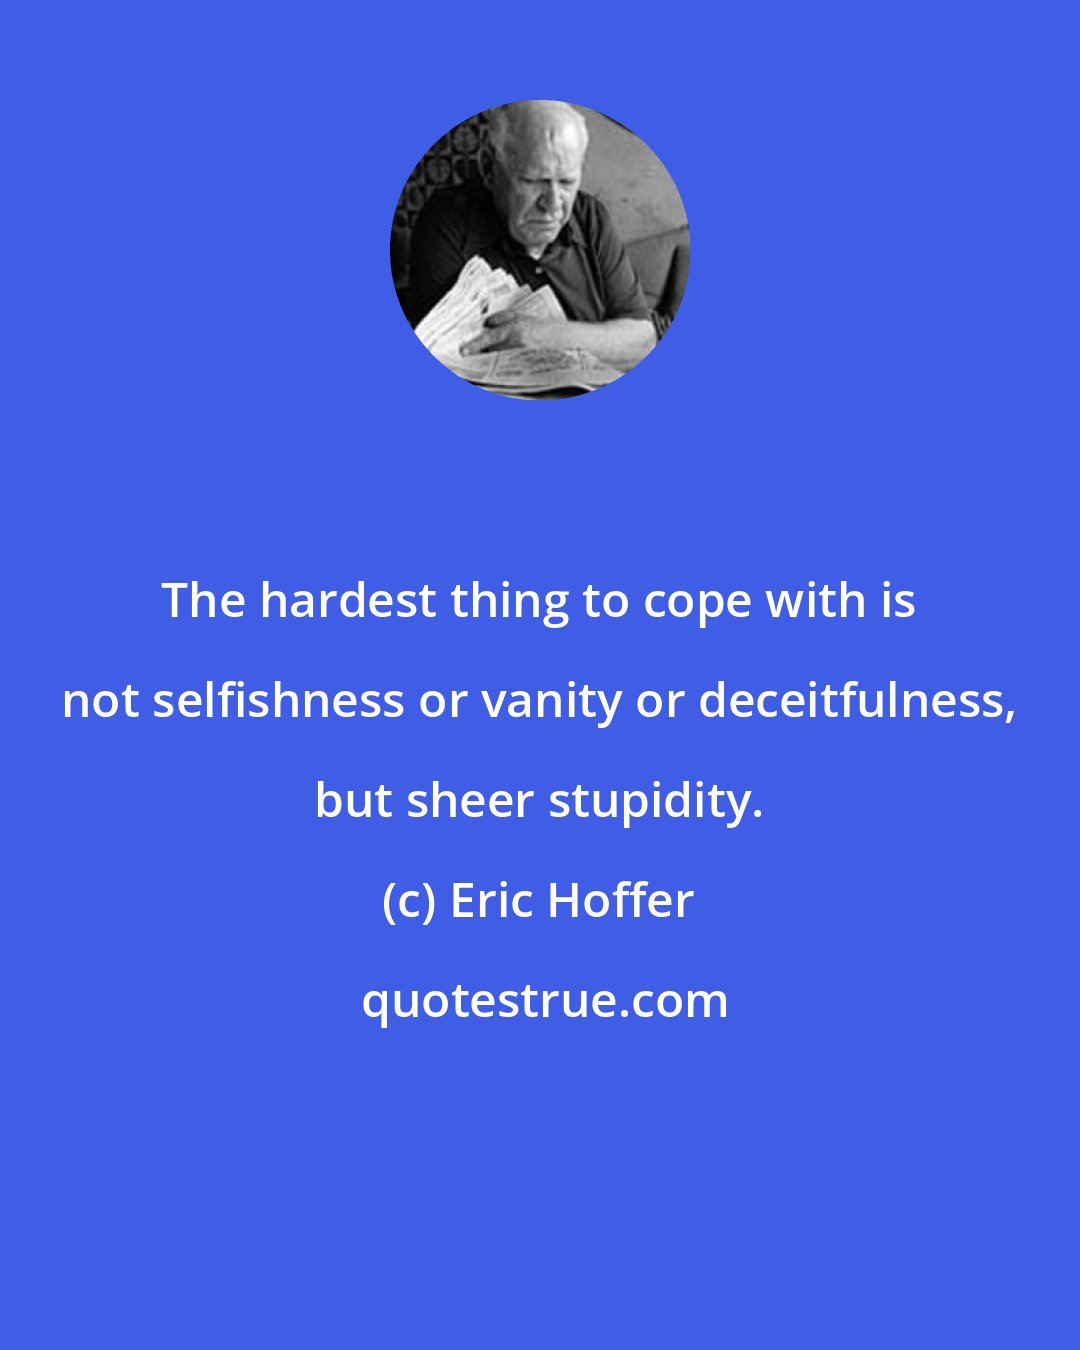 Eric Hoffer: The hardest thing to cope with is not selfishness or vanity or deceitfulness, but sheer stupidity.